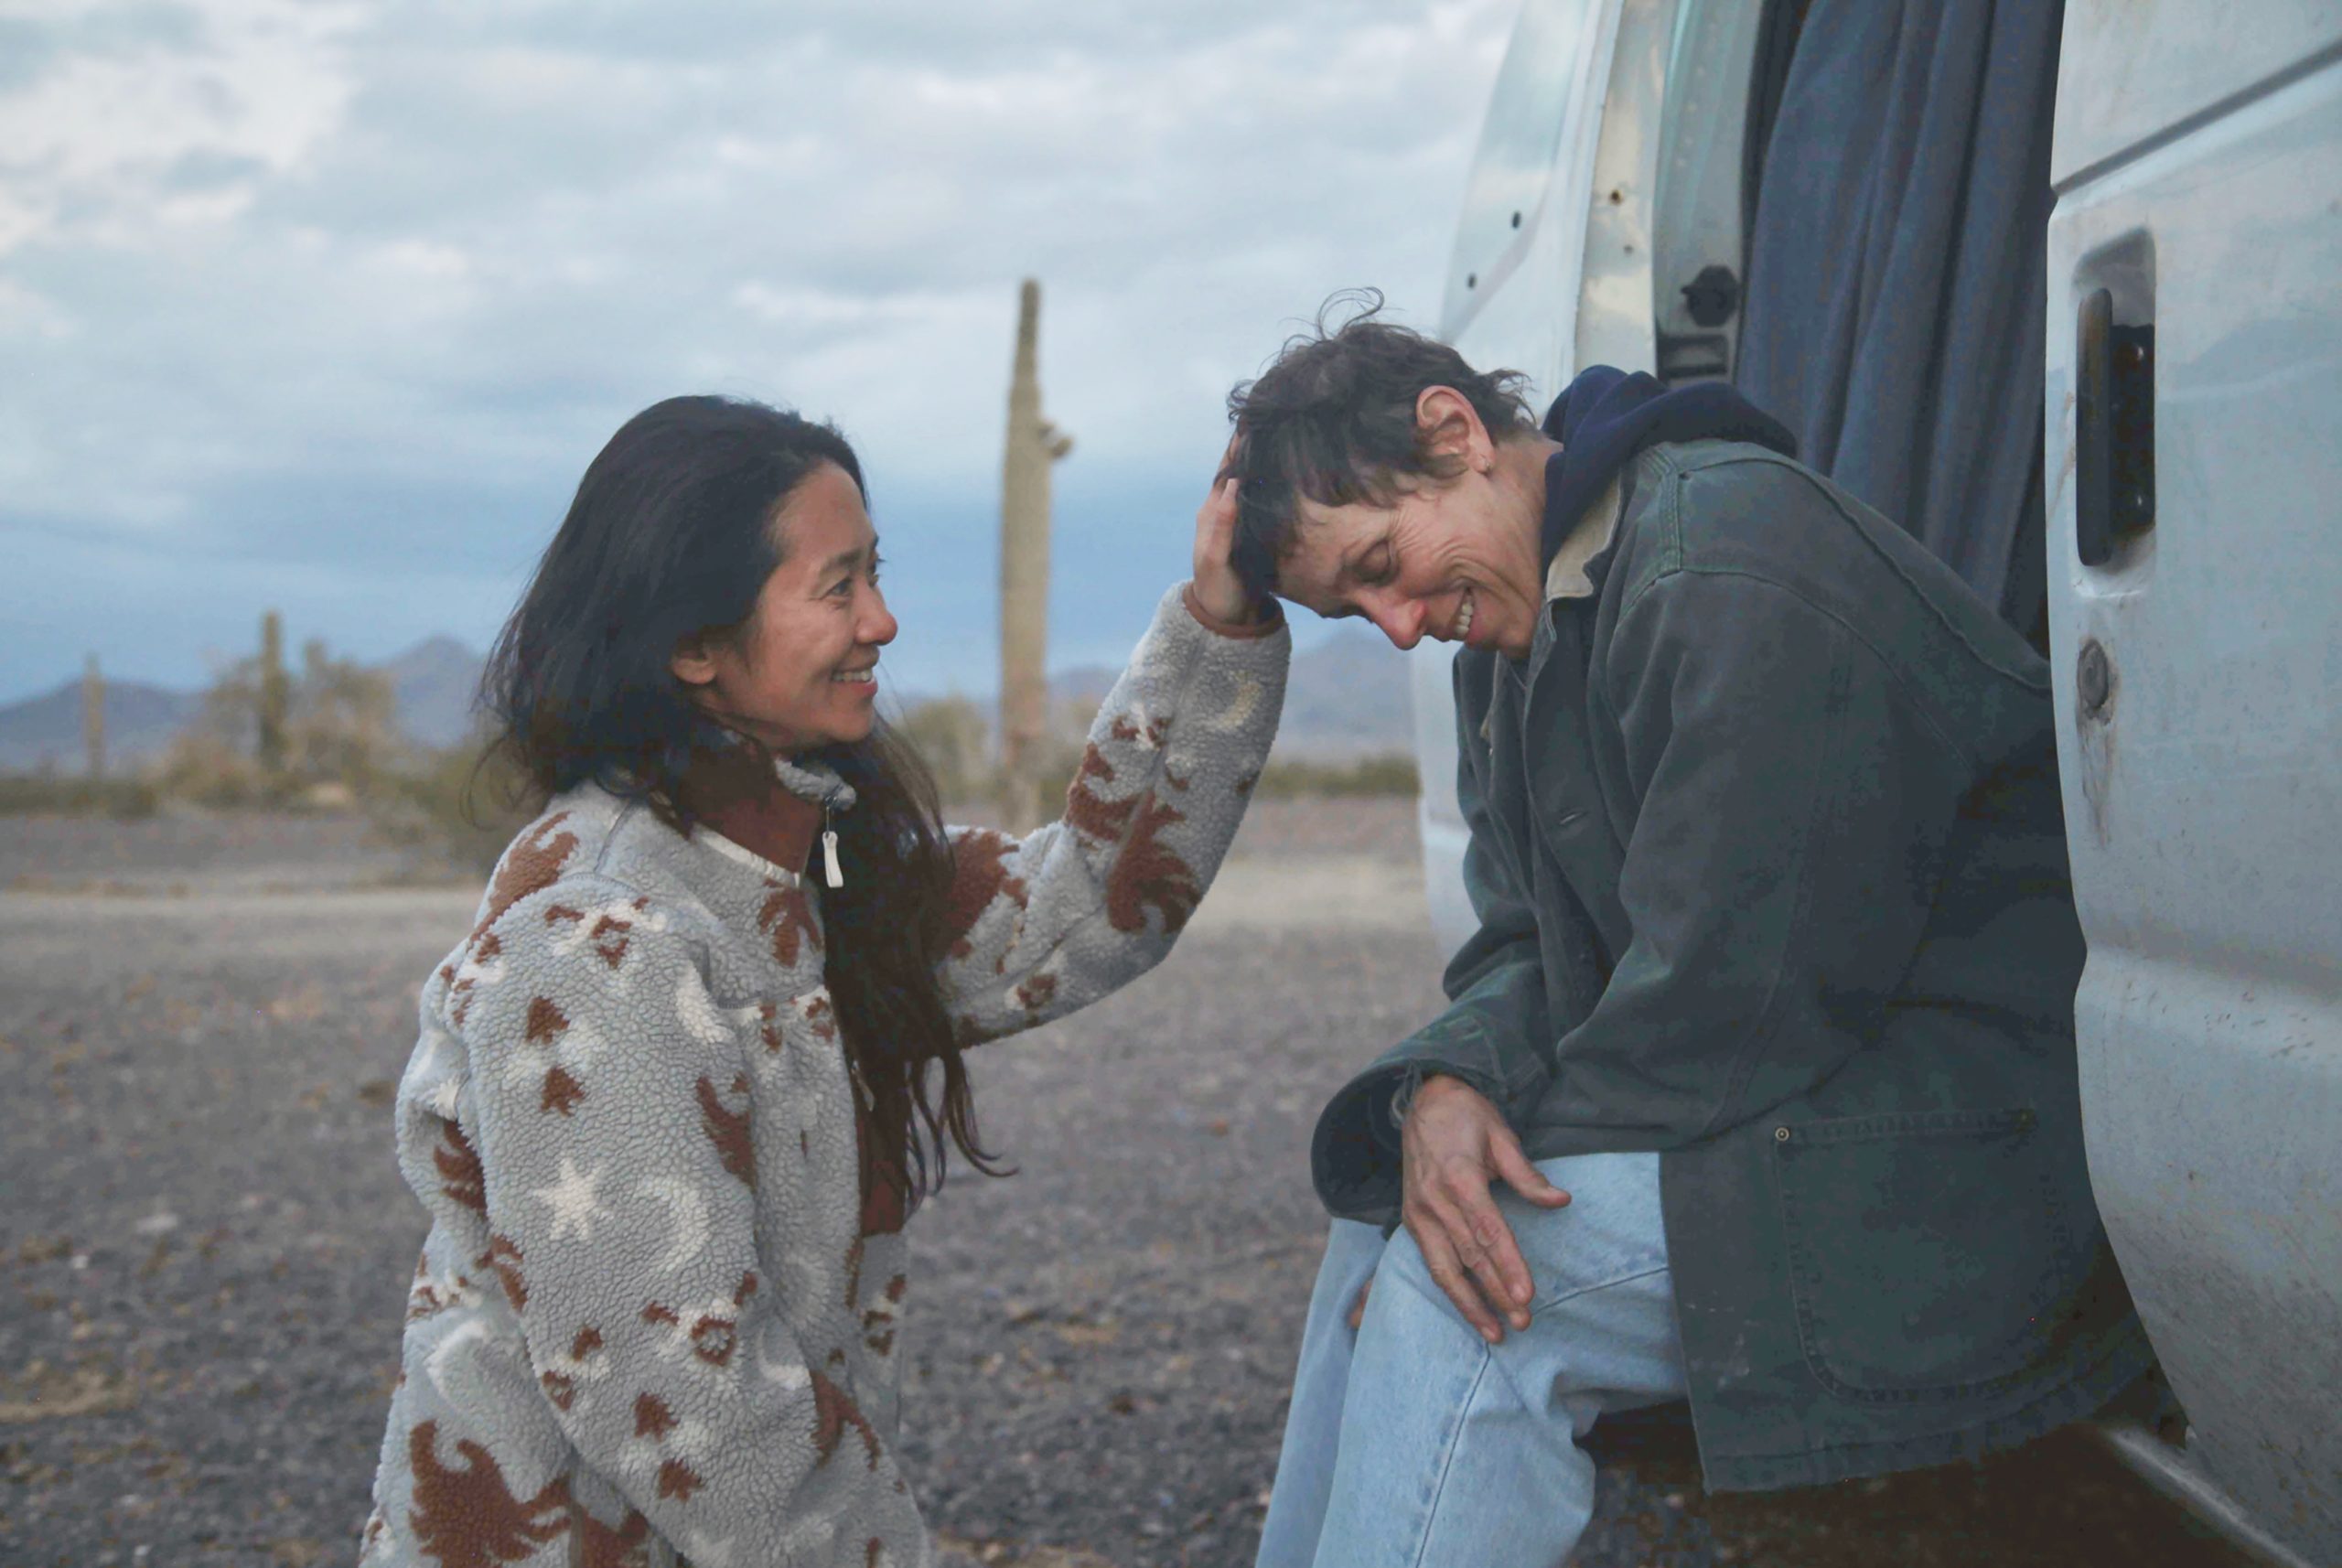 Written and directed by Chloé Zhao Nomadland is the Best Picture